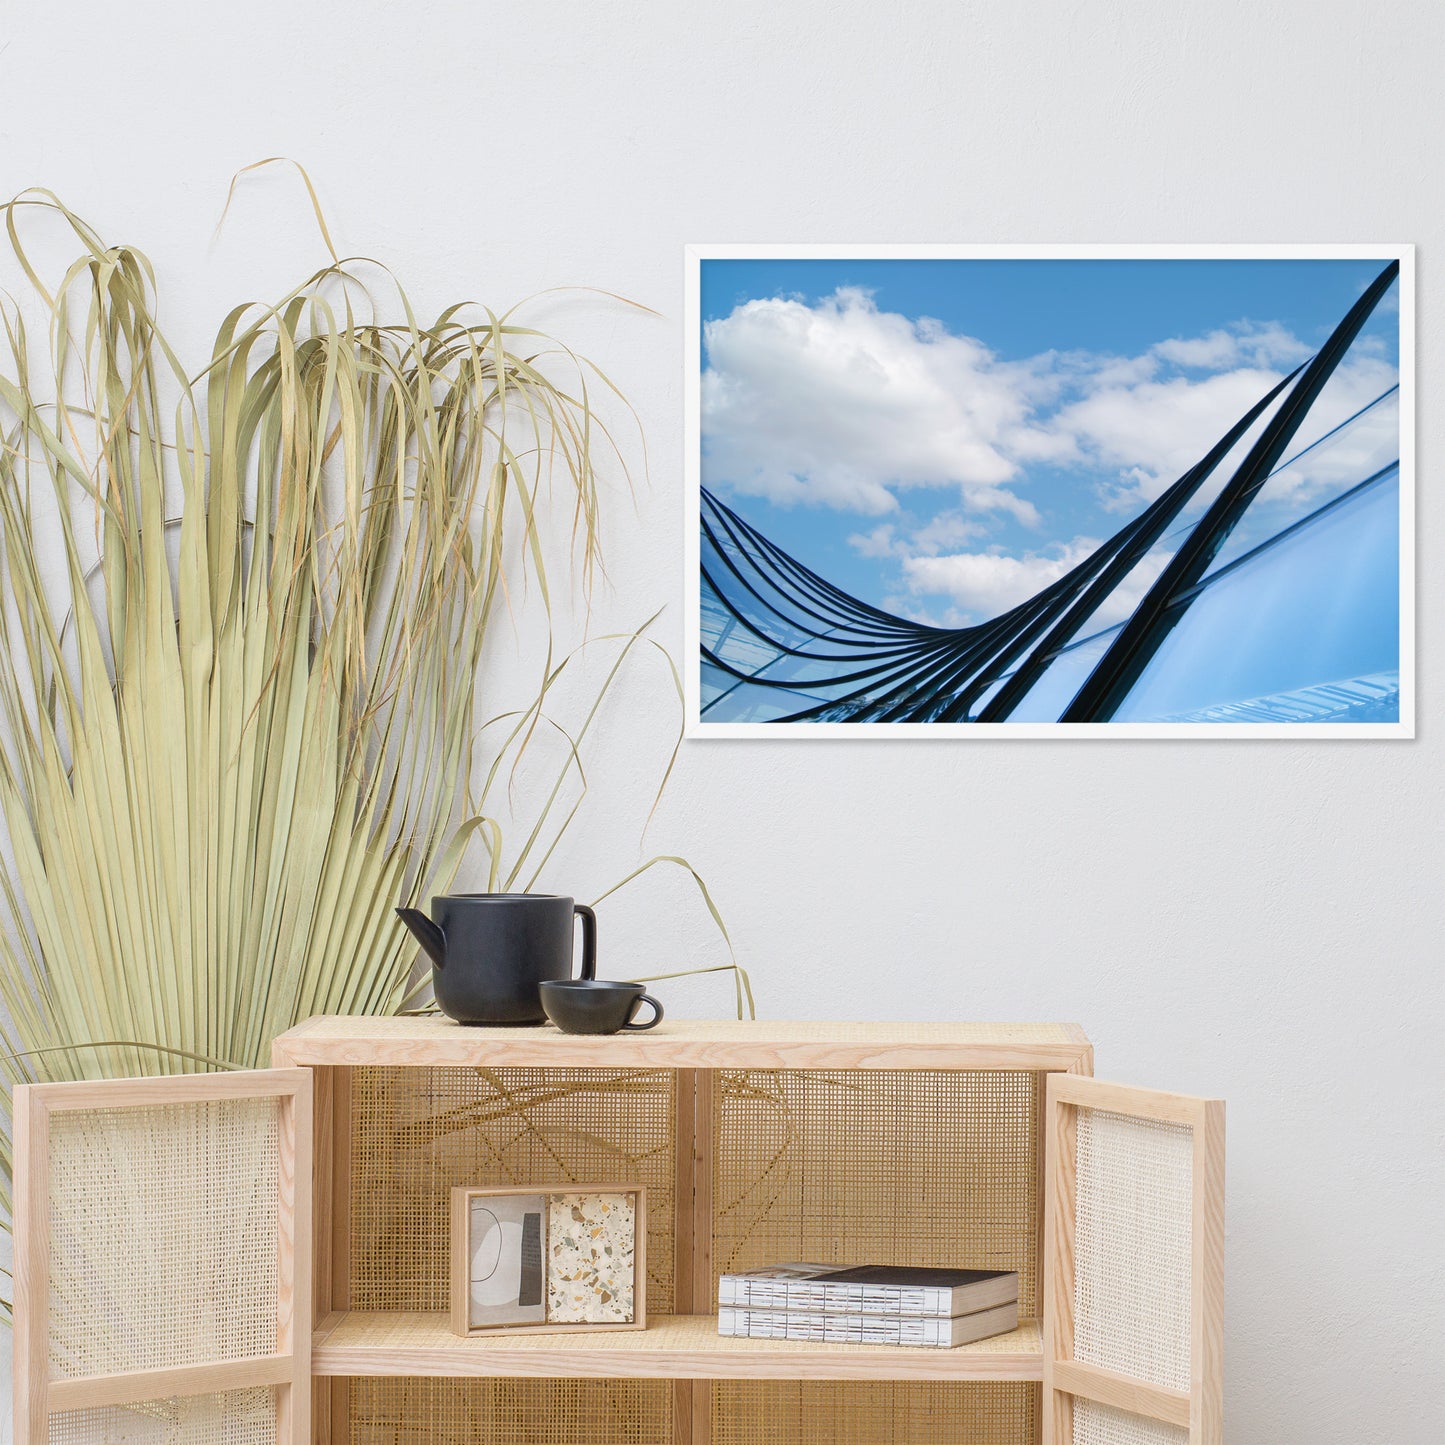 Glass and Azure Architectural Photograph Framed Wall Art Print